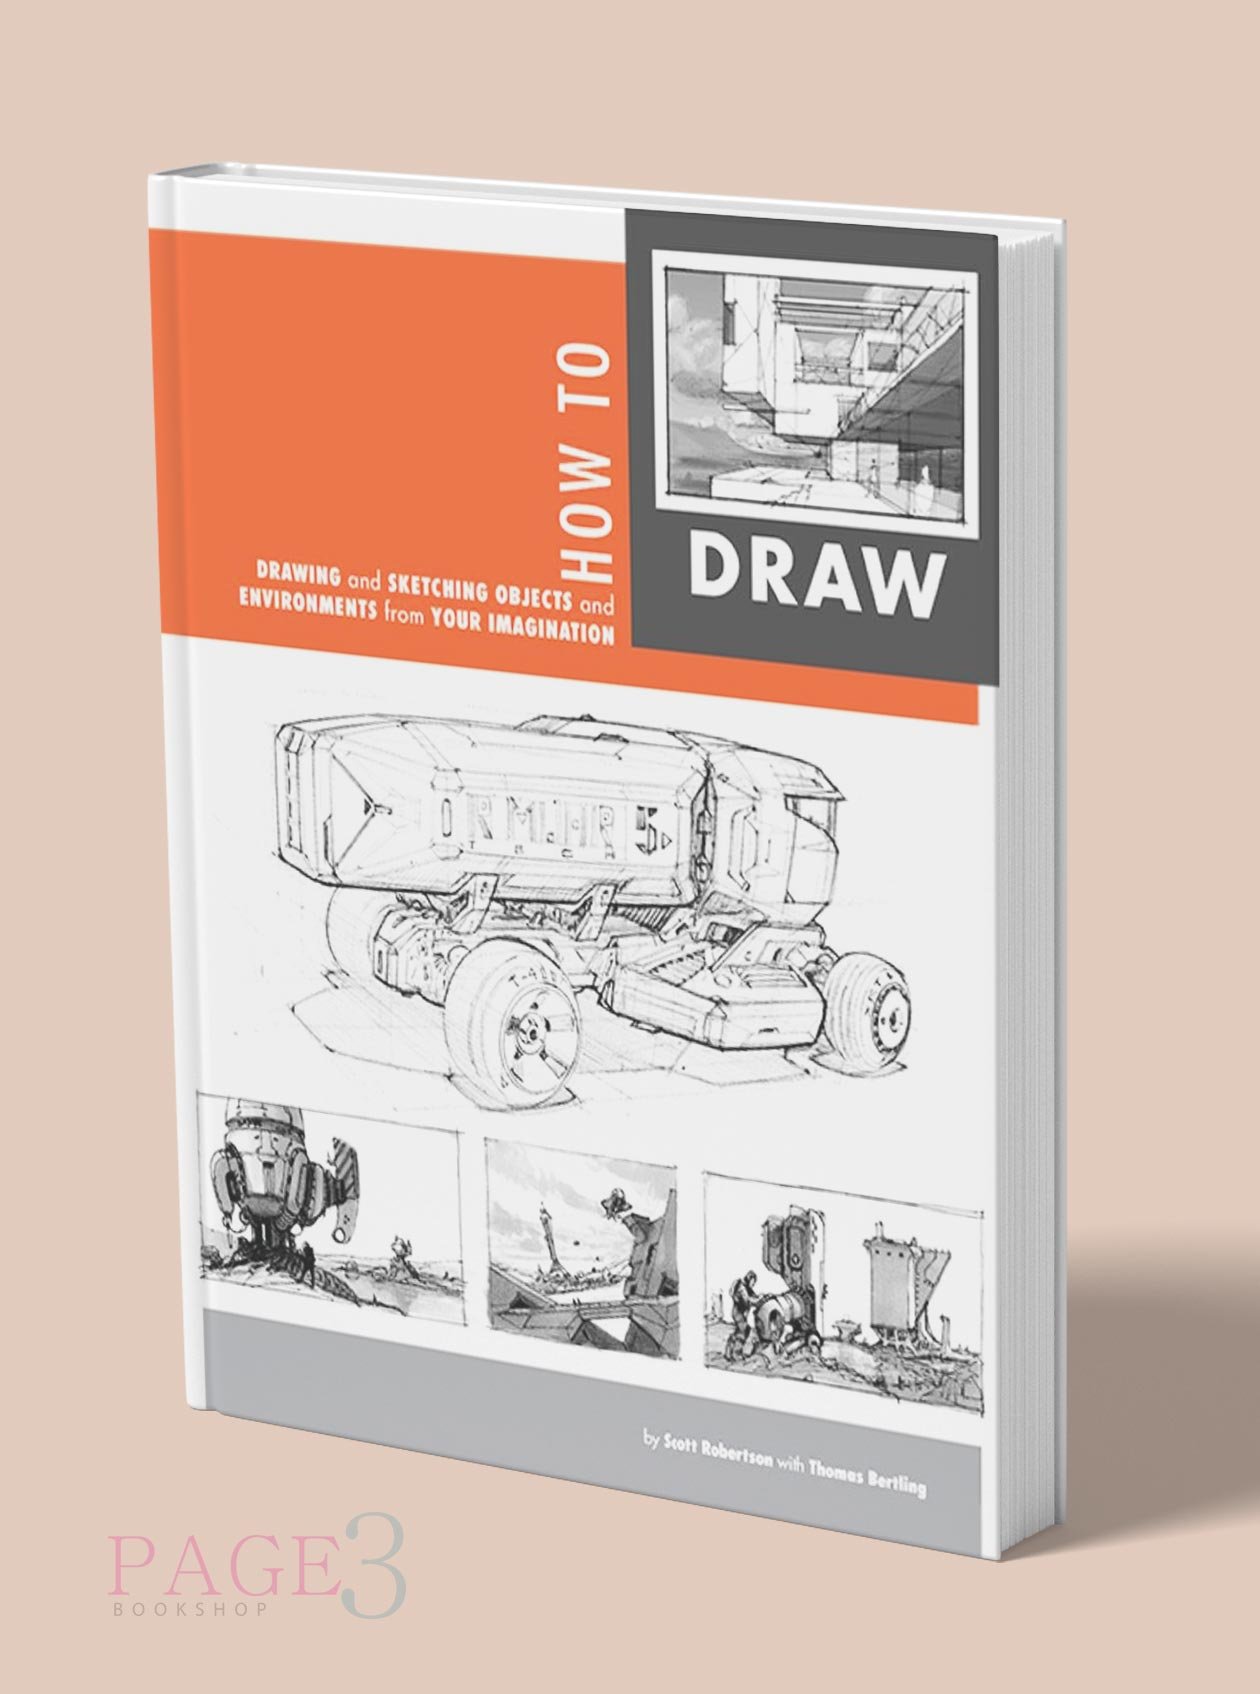 how to draw by scott robertson and thomas bertling pdf